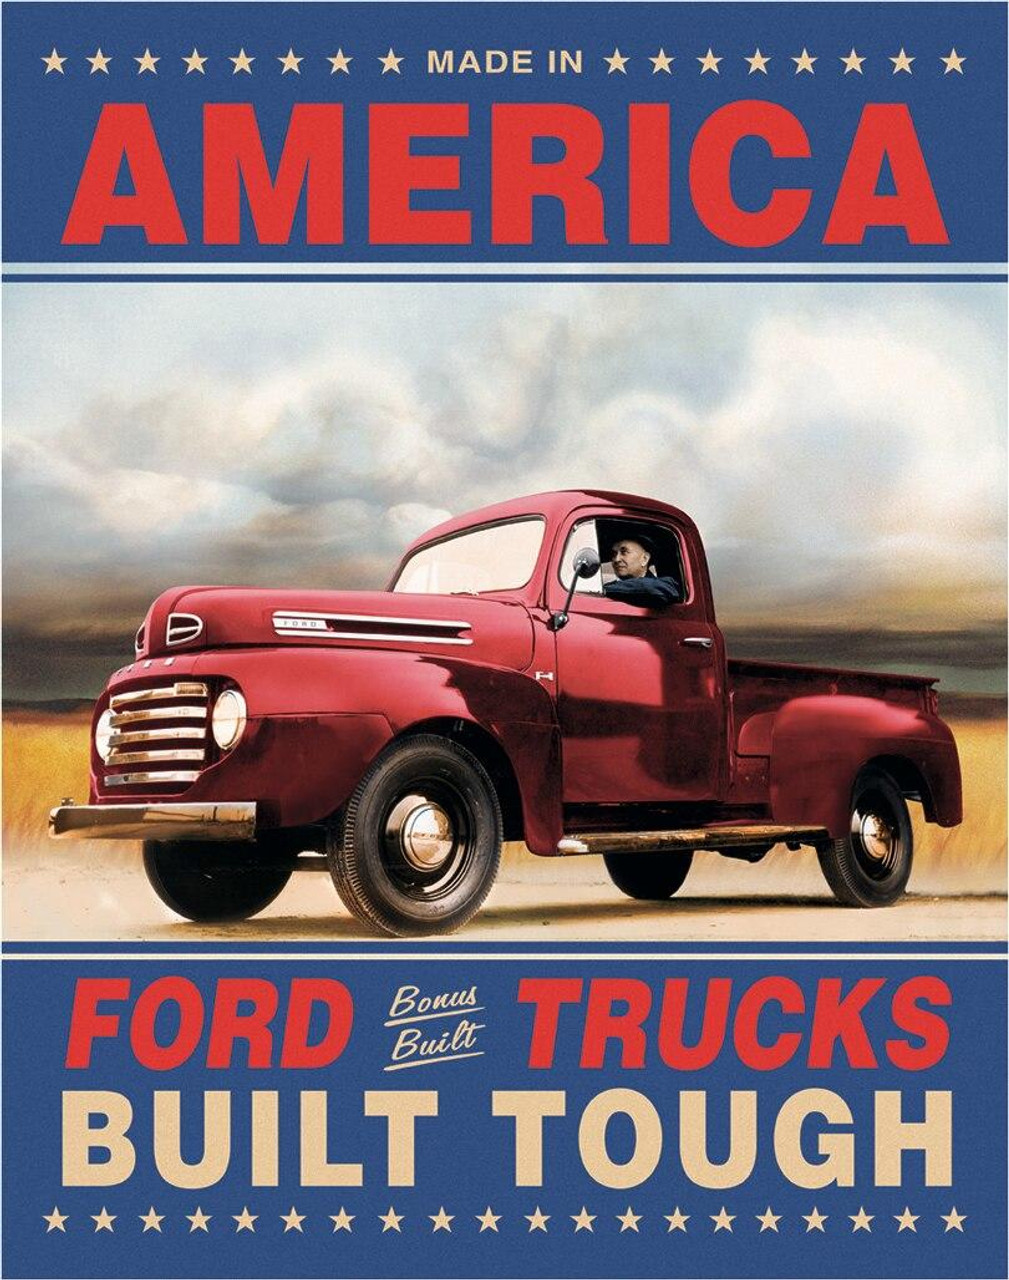 How Ford is Built Tough